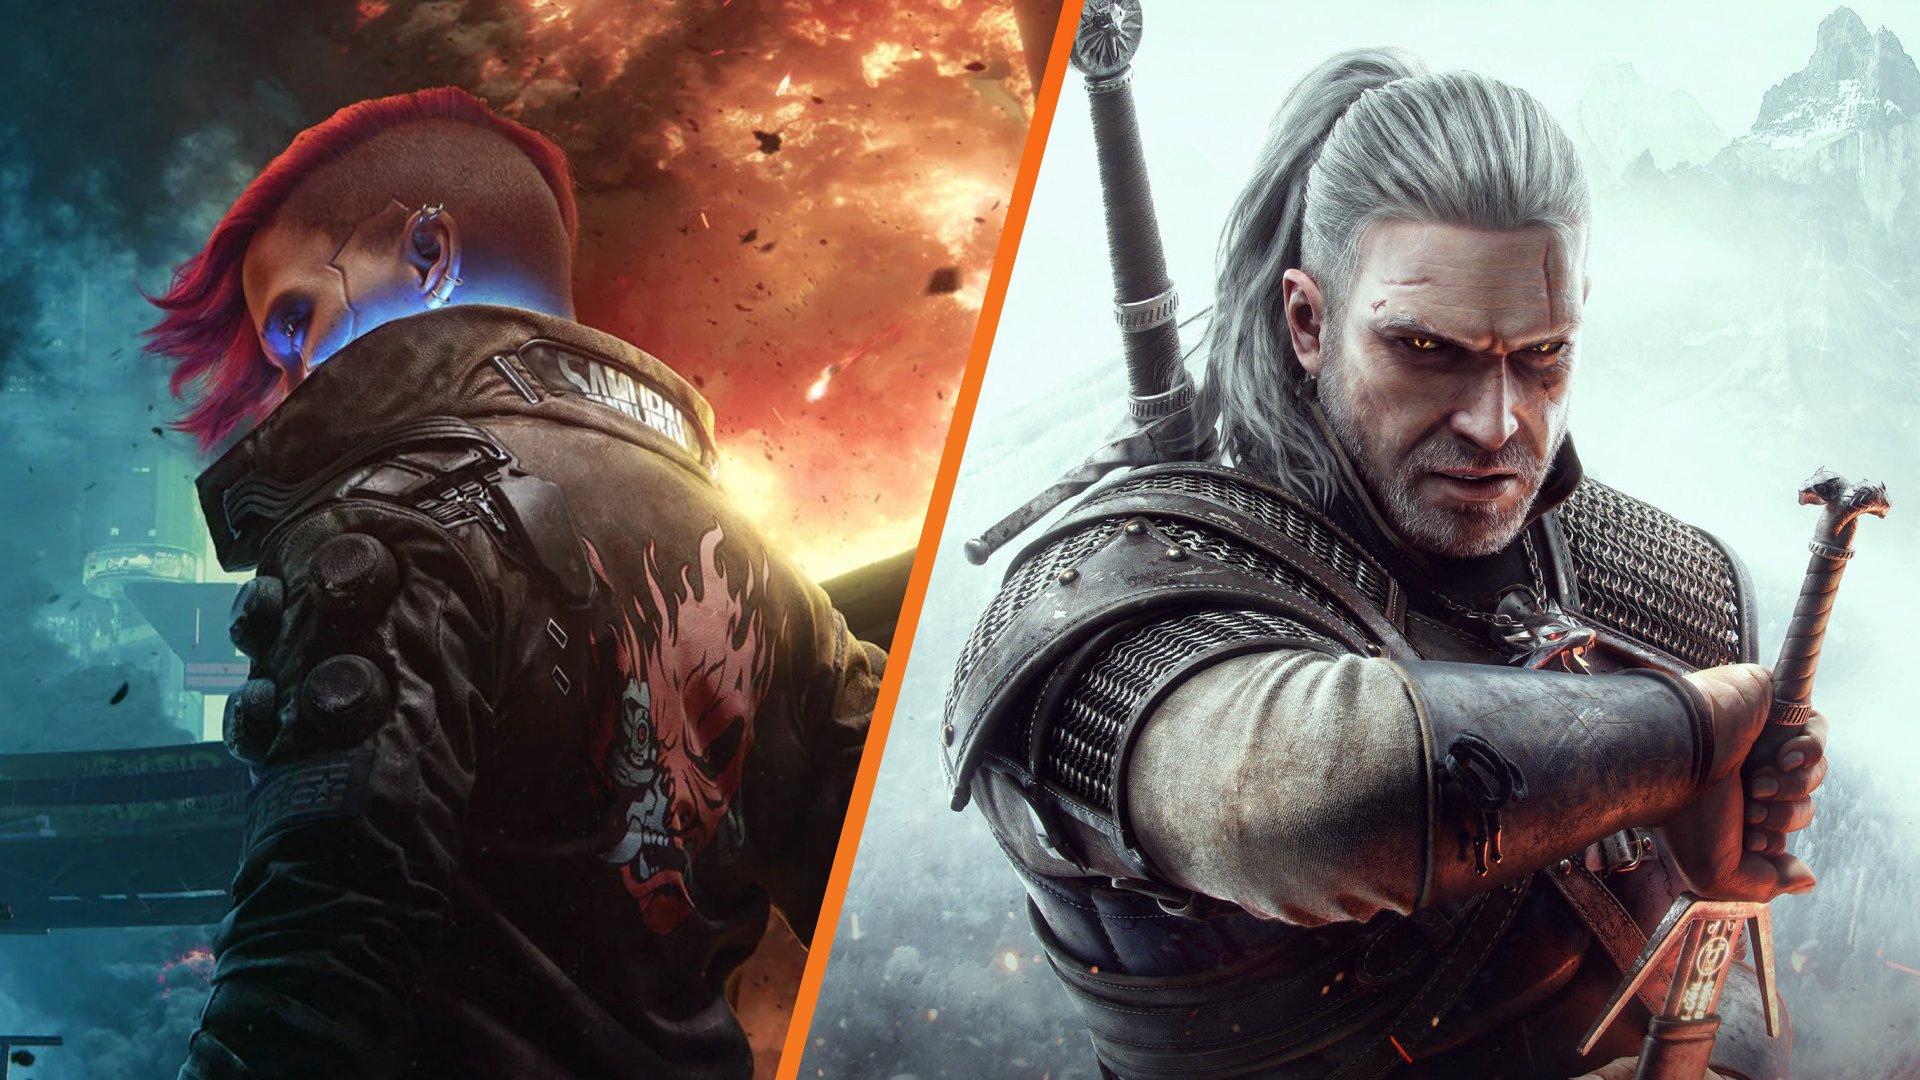 CD Projekt is considering licensing out its Cyberpunk or The Witcher IP to mobile developers